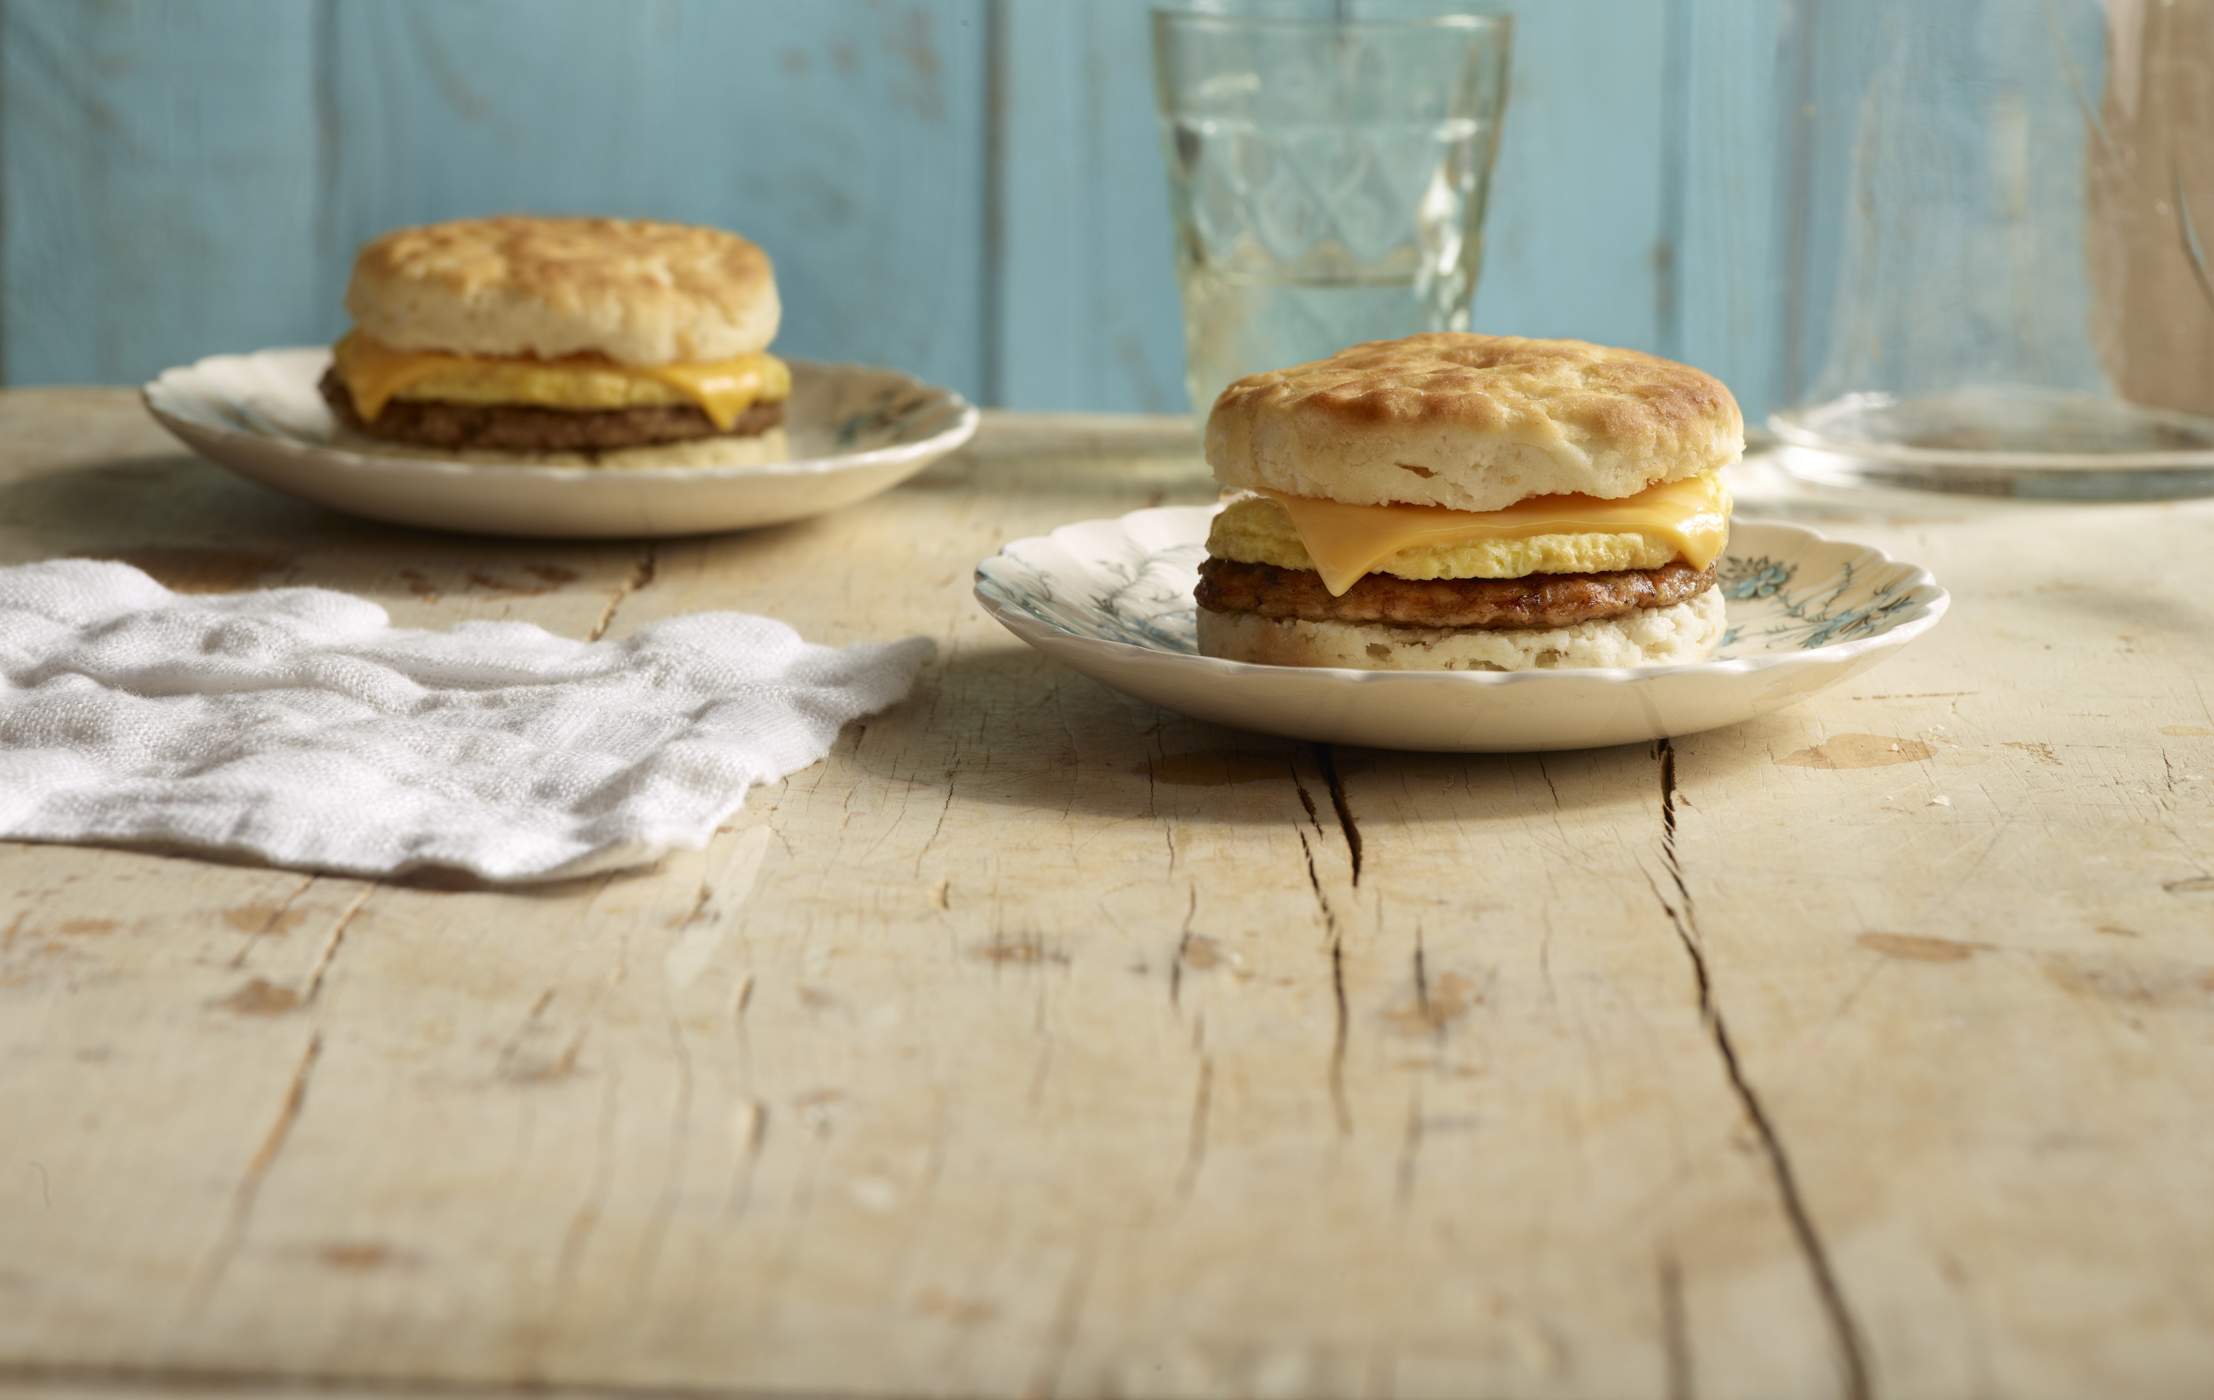 Jimmy Dean Frozen Biscuit Breakfast Sandwiches - Sausage, Egg & Cheese; image 2 of 3